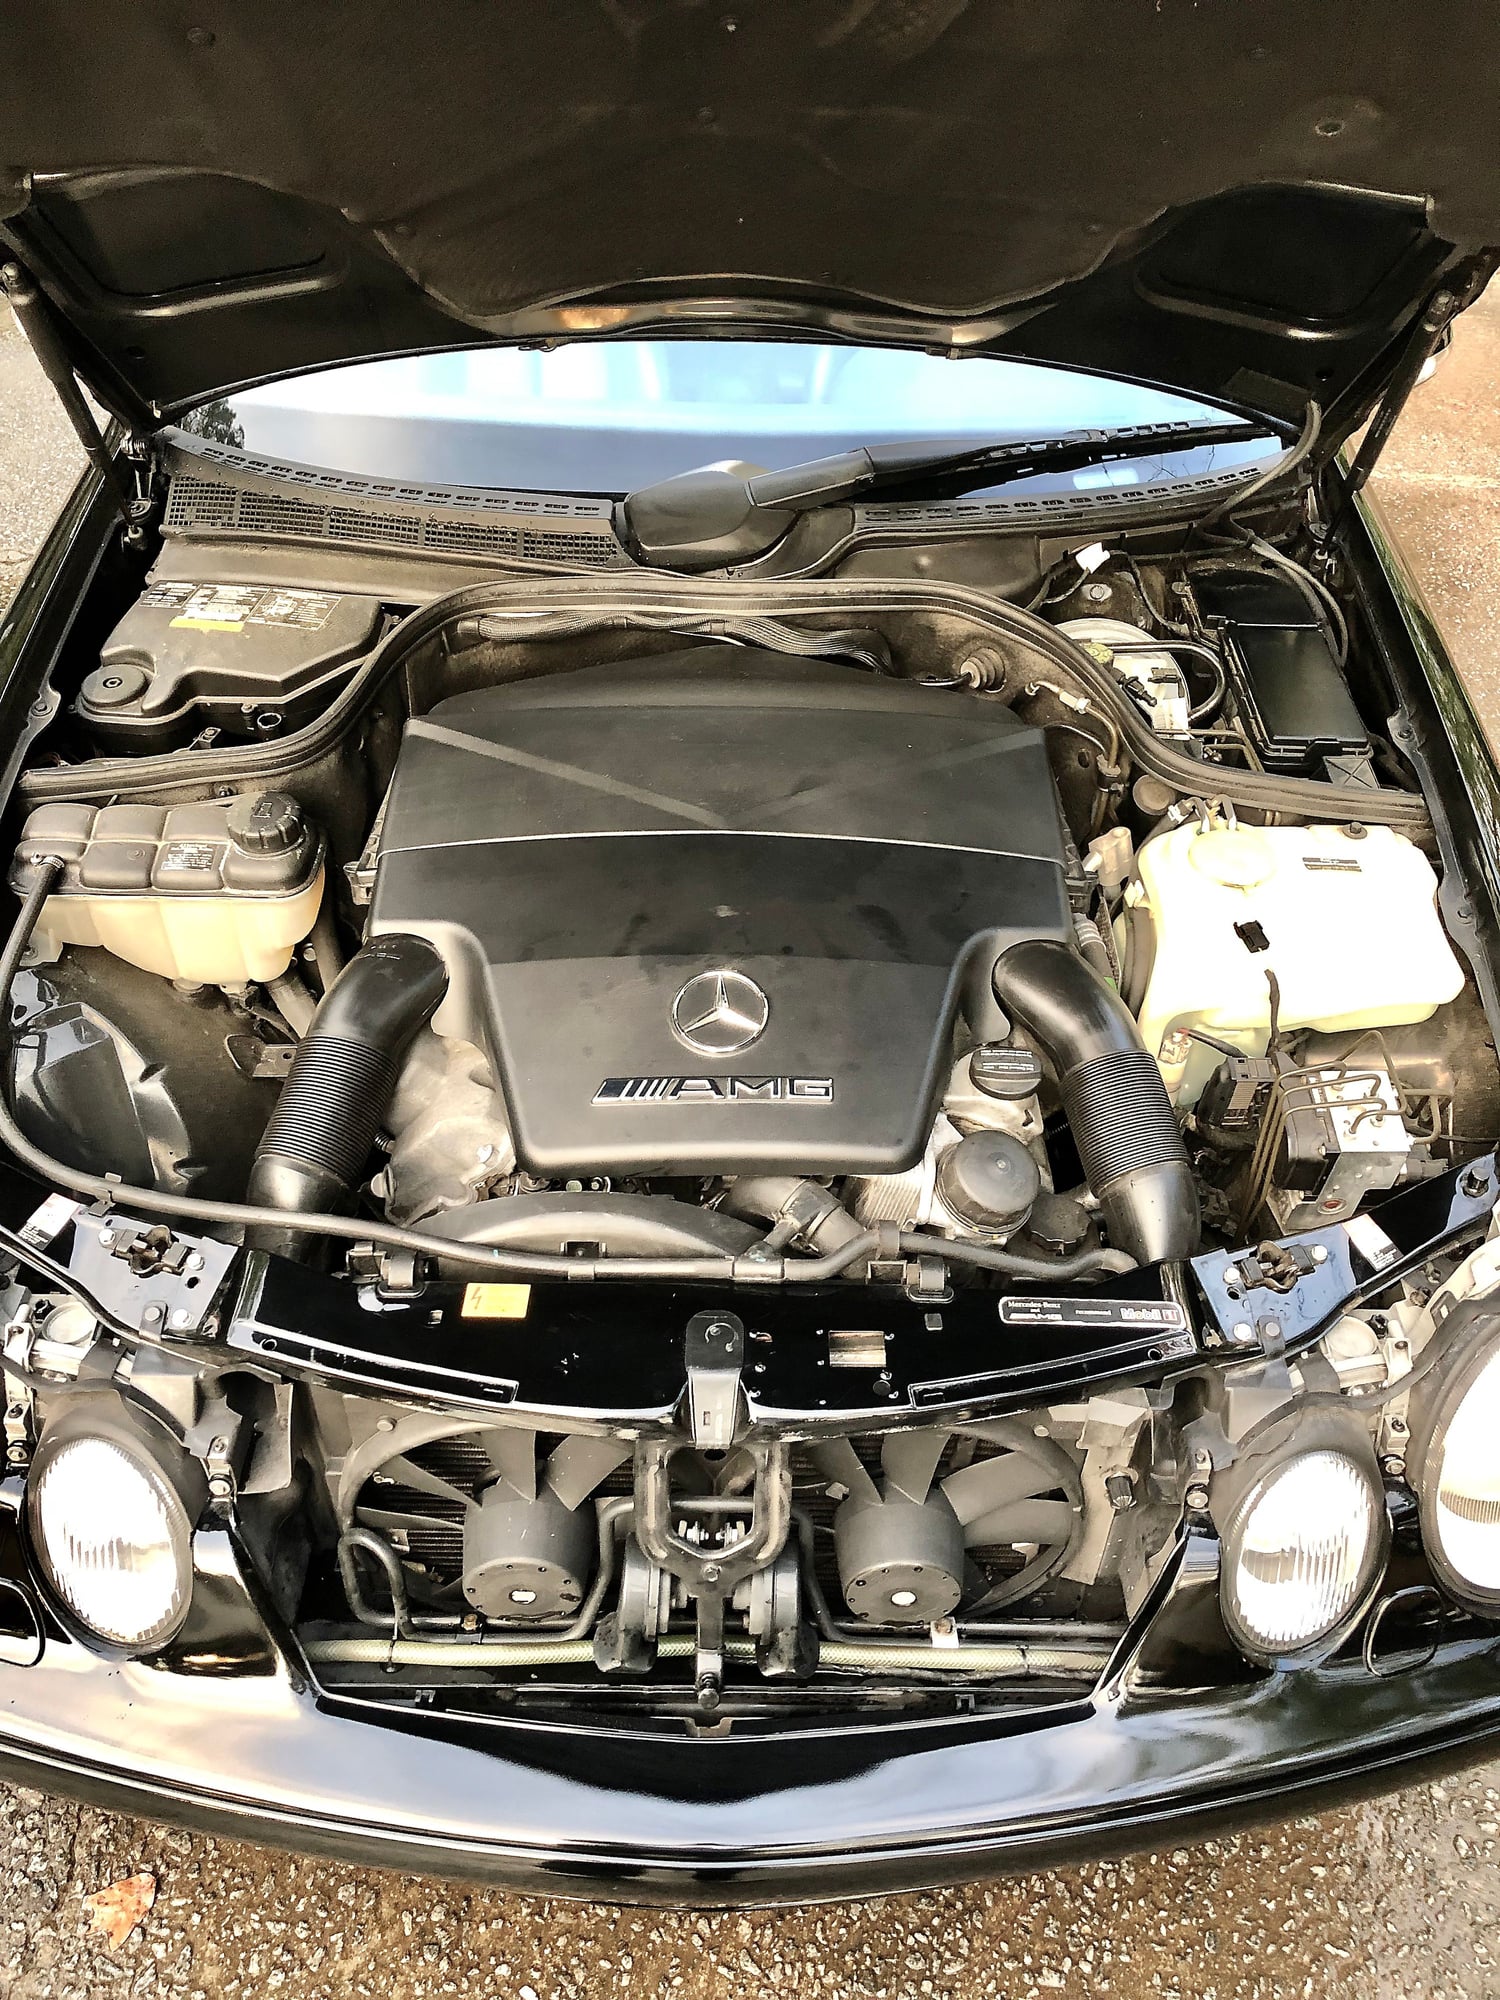 2002 Mercedes-Benz CLK55 AMG - Absolute Time Machine, (all original in like new condition) - Used - VIN WDBLK74G42T118396 - 76,000 Miles - 8 cyl - 2WD - Automatic - Convertible - Black - Atlanta, GA 30308, United States